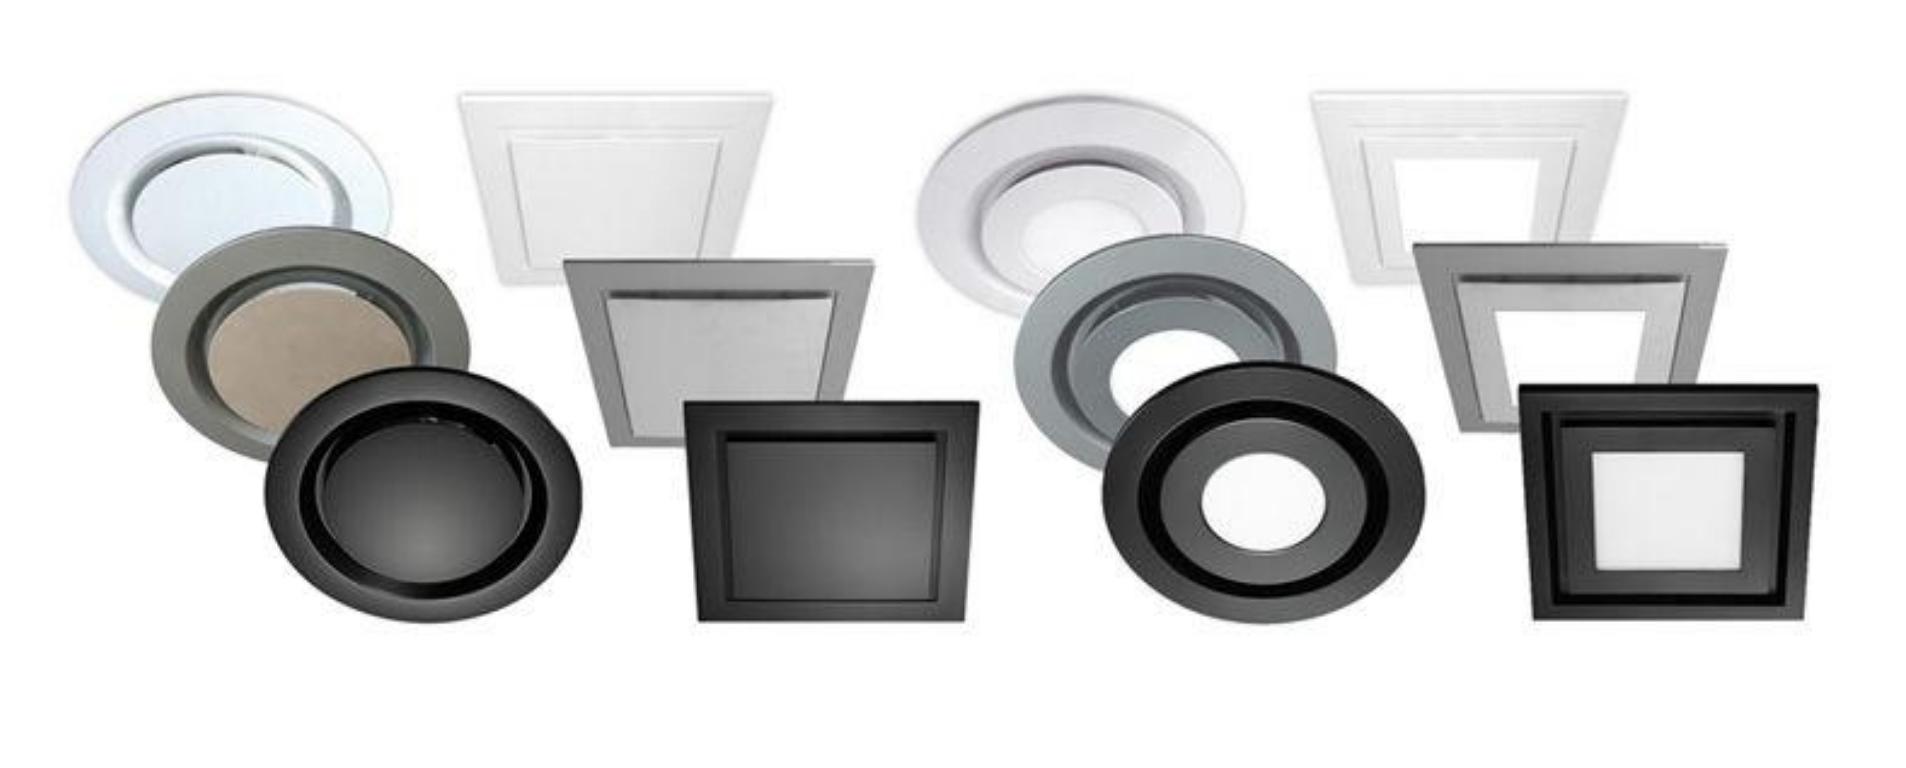 Ventair Airbus Fascia's Face Plates for Exhaust Fan Round and Square in ø200mm/ø225mm/ø250mm w/ Black, Silver or White Ventair